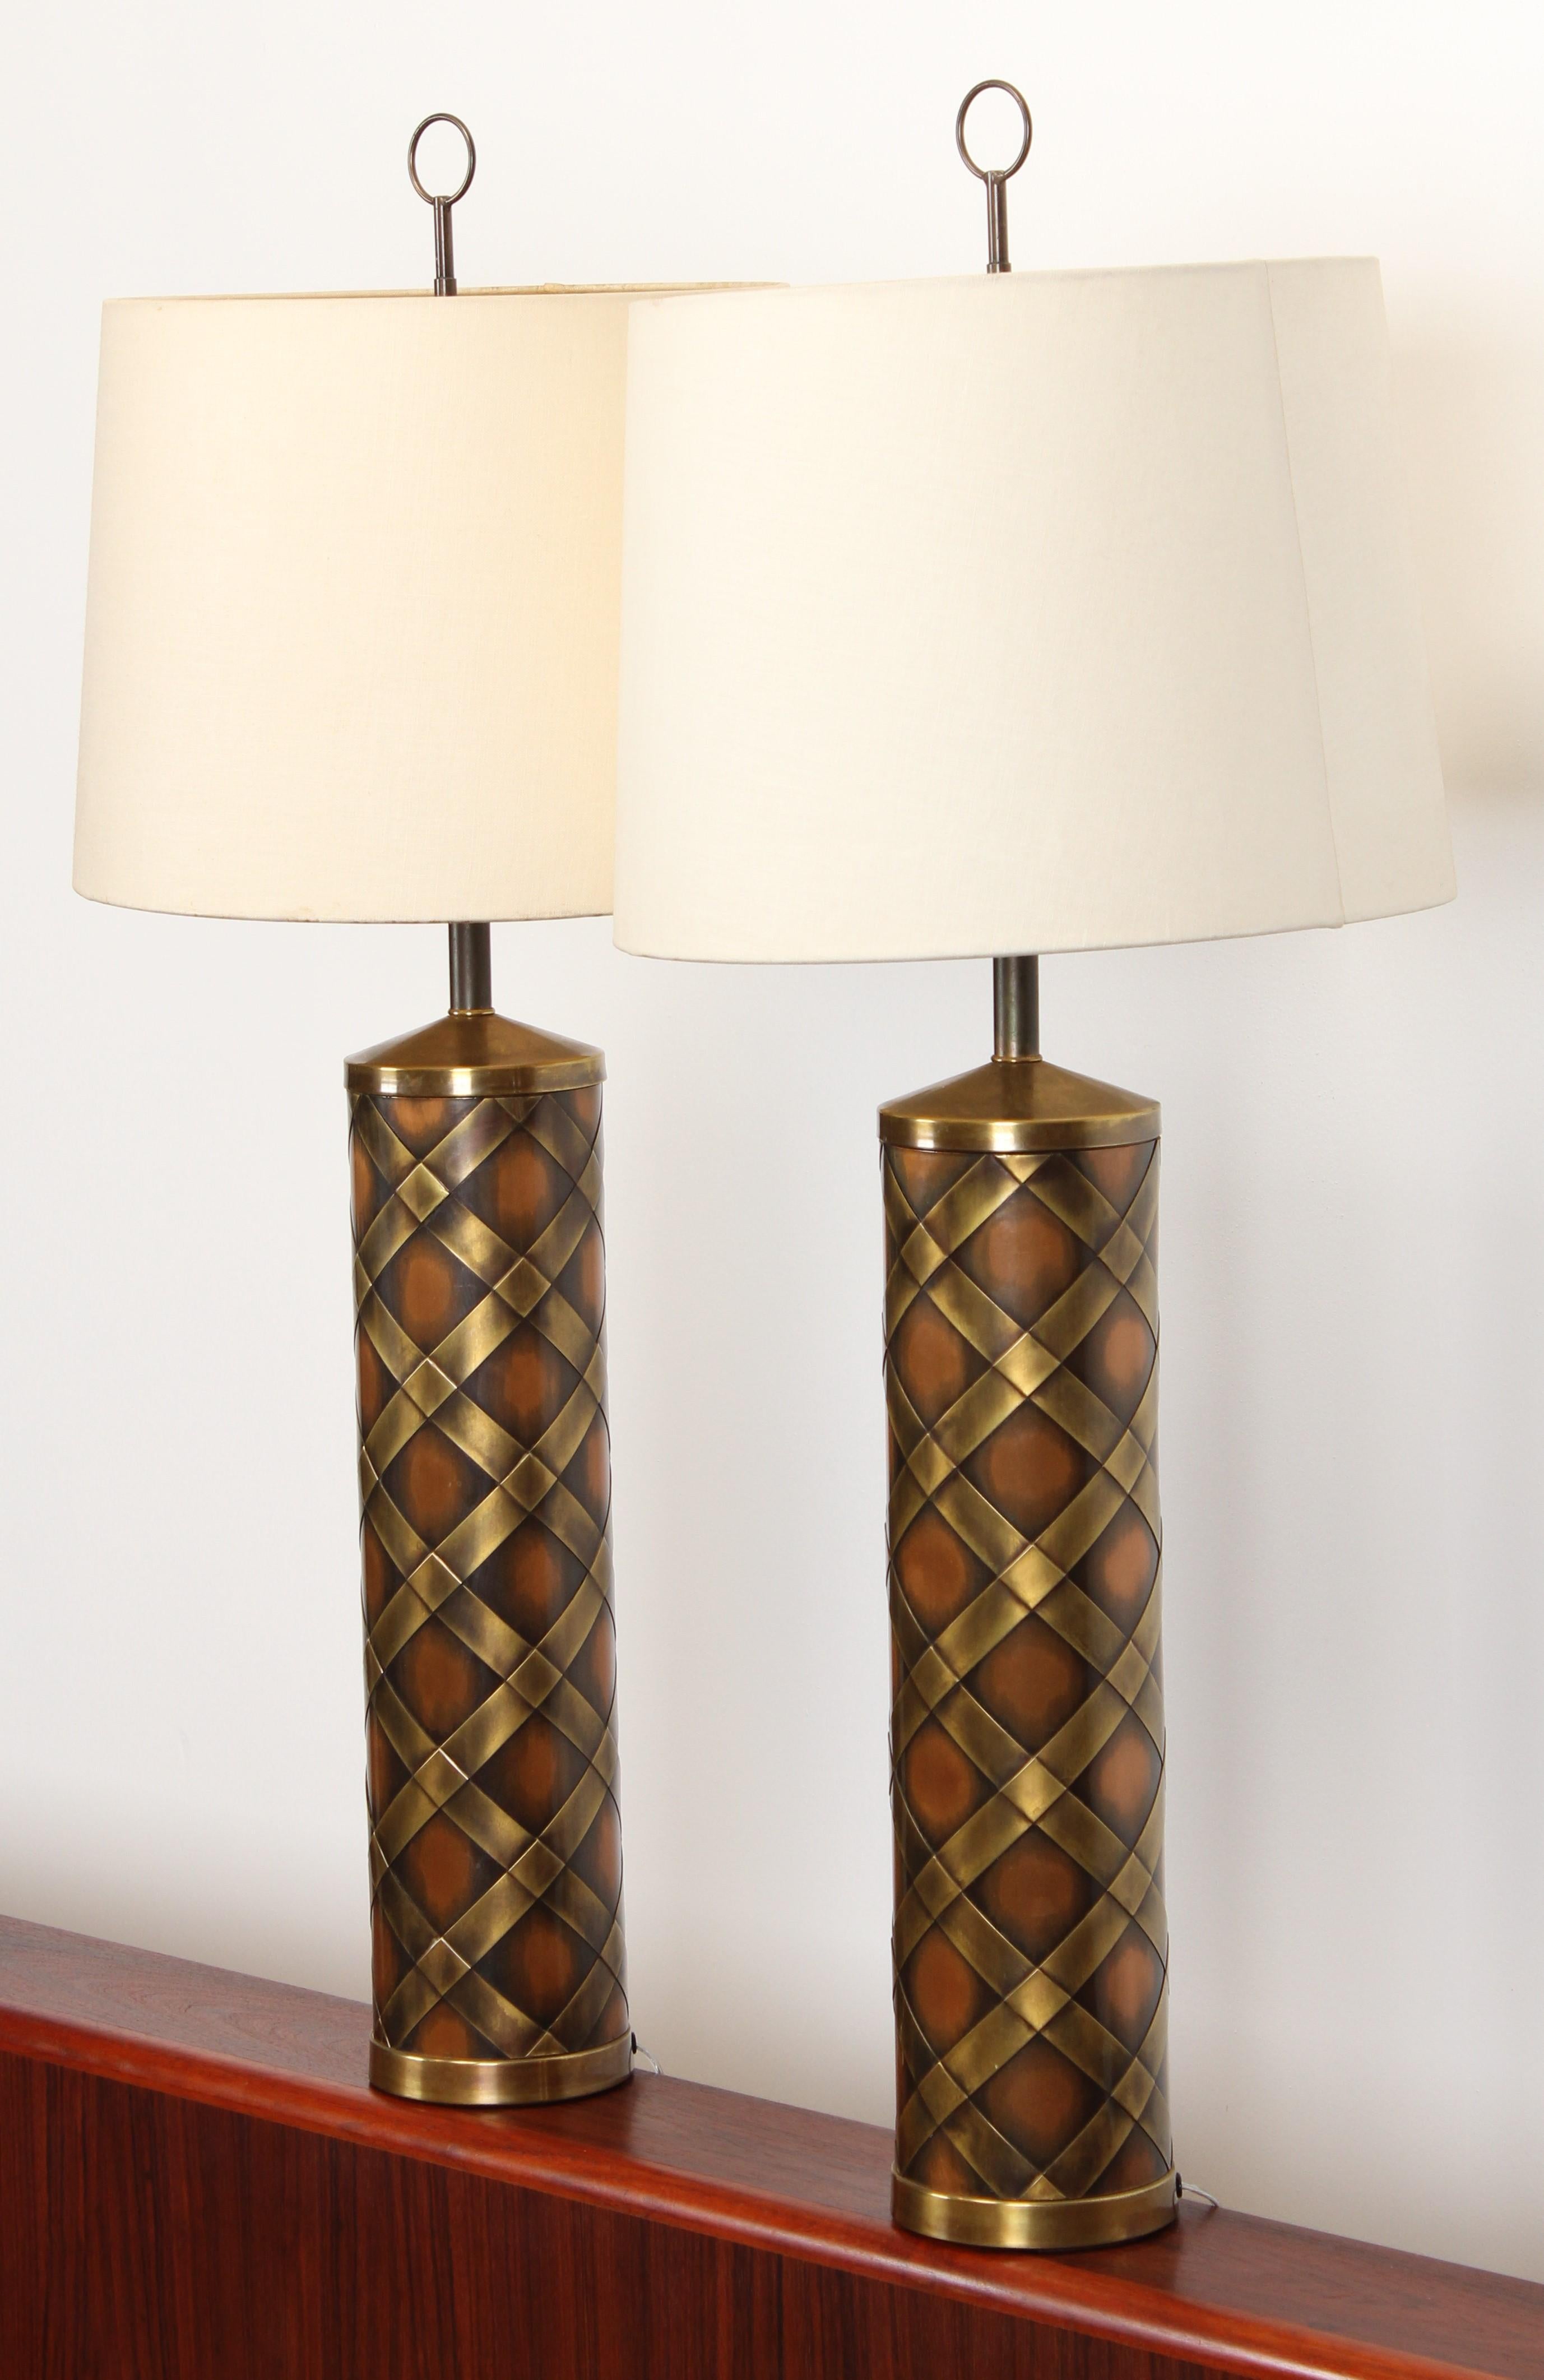 Pair of monumental brass and copper weave table lamps, 1960s. Very good condition. Recently rewired with new quality sockets. Height to bottom of socket is 26.5